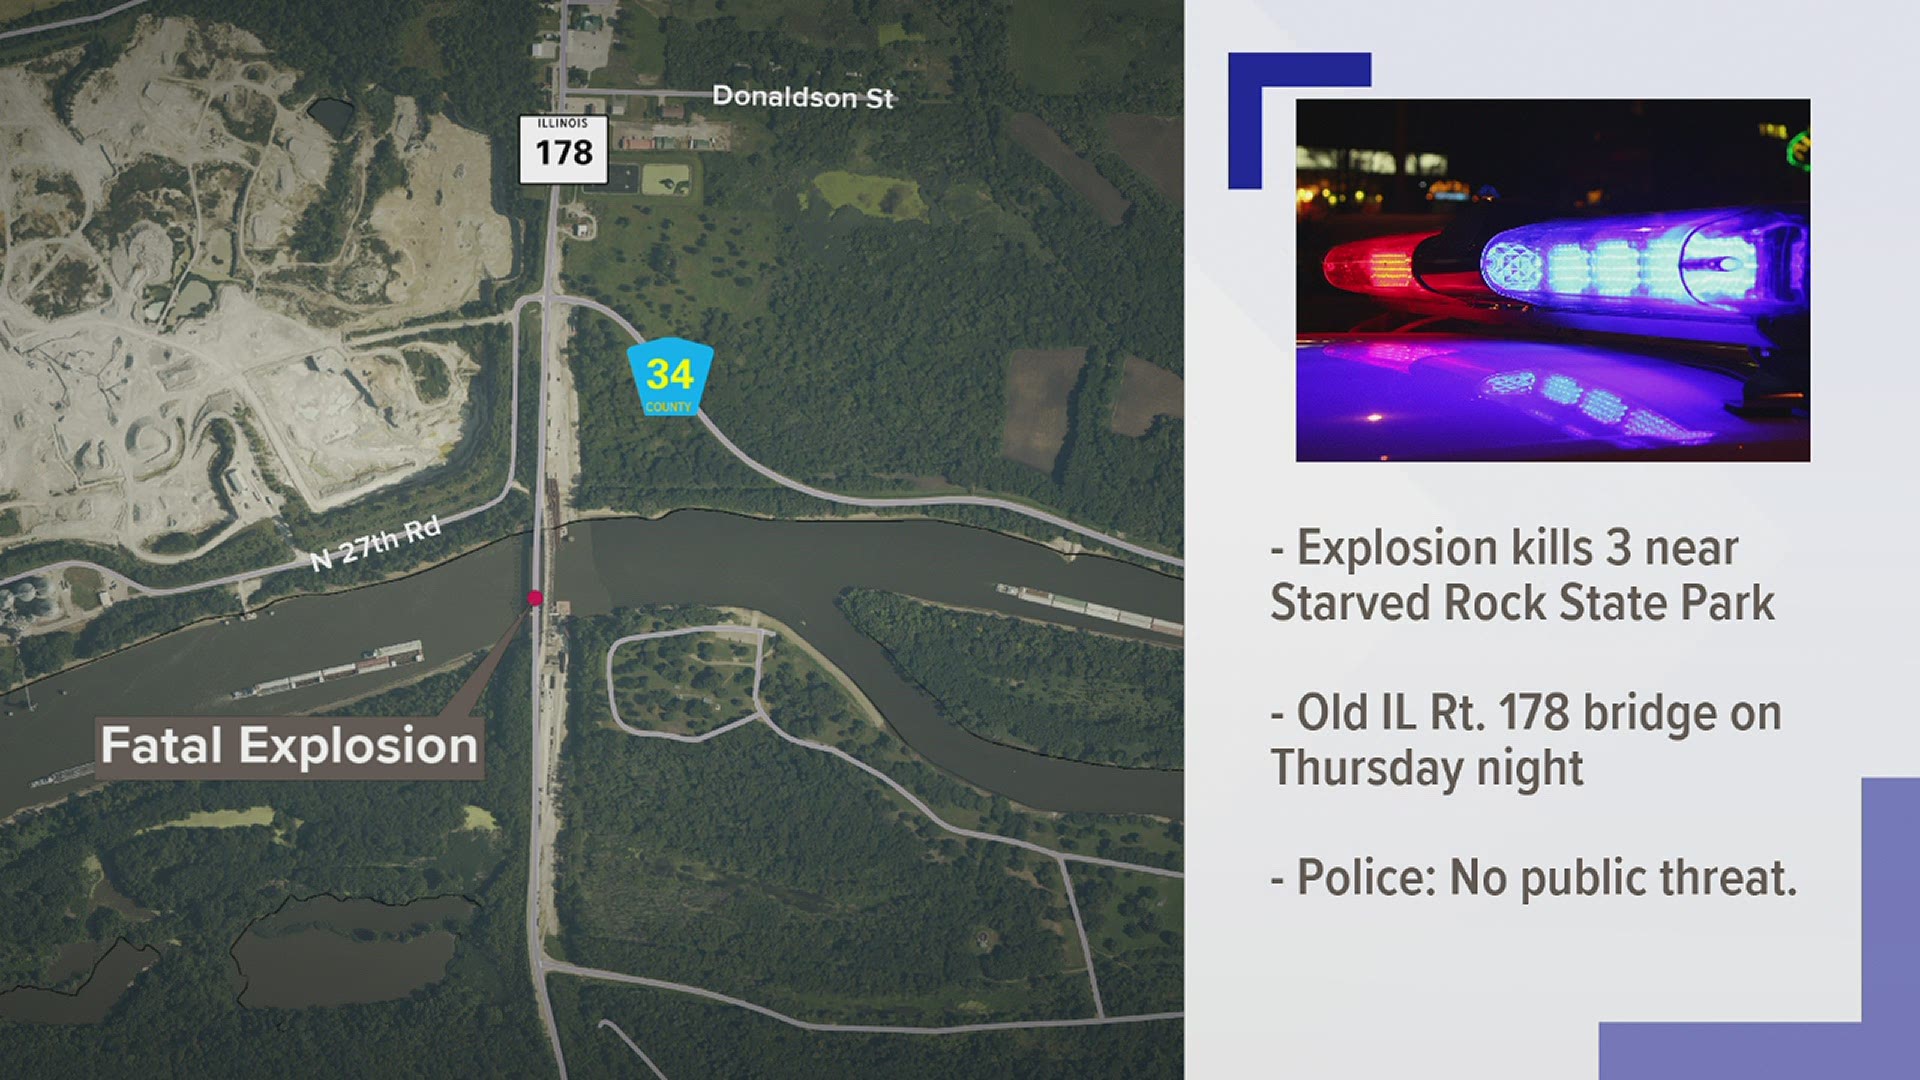 The explosion was reported around 7 p.m. Thursday, May 6.